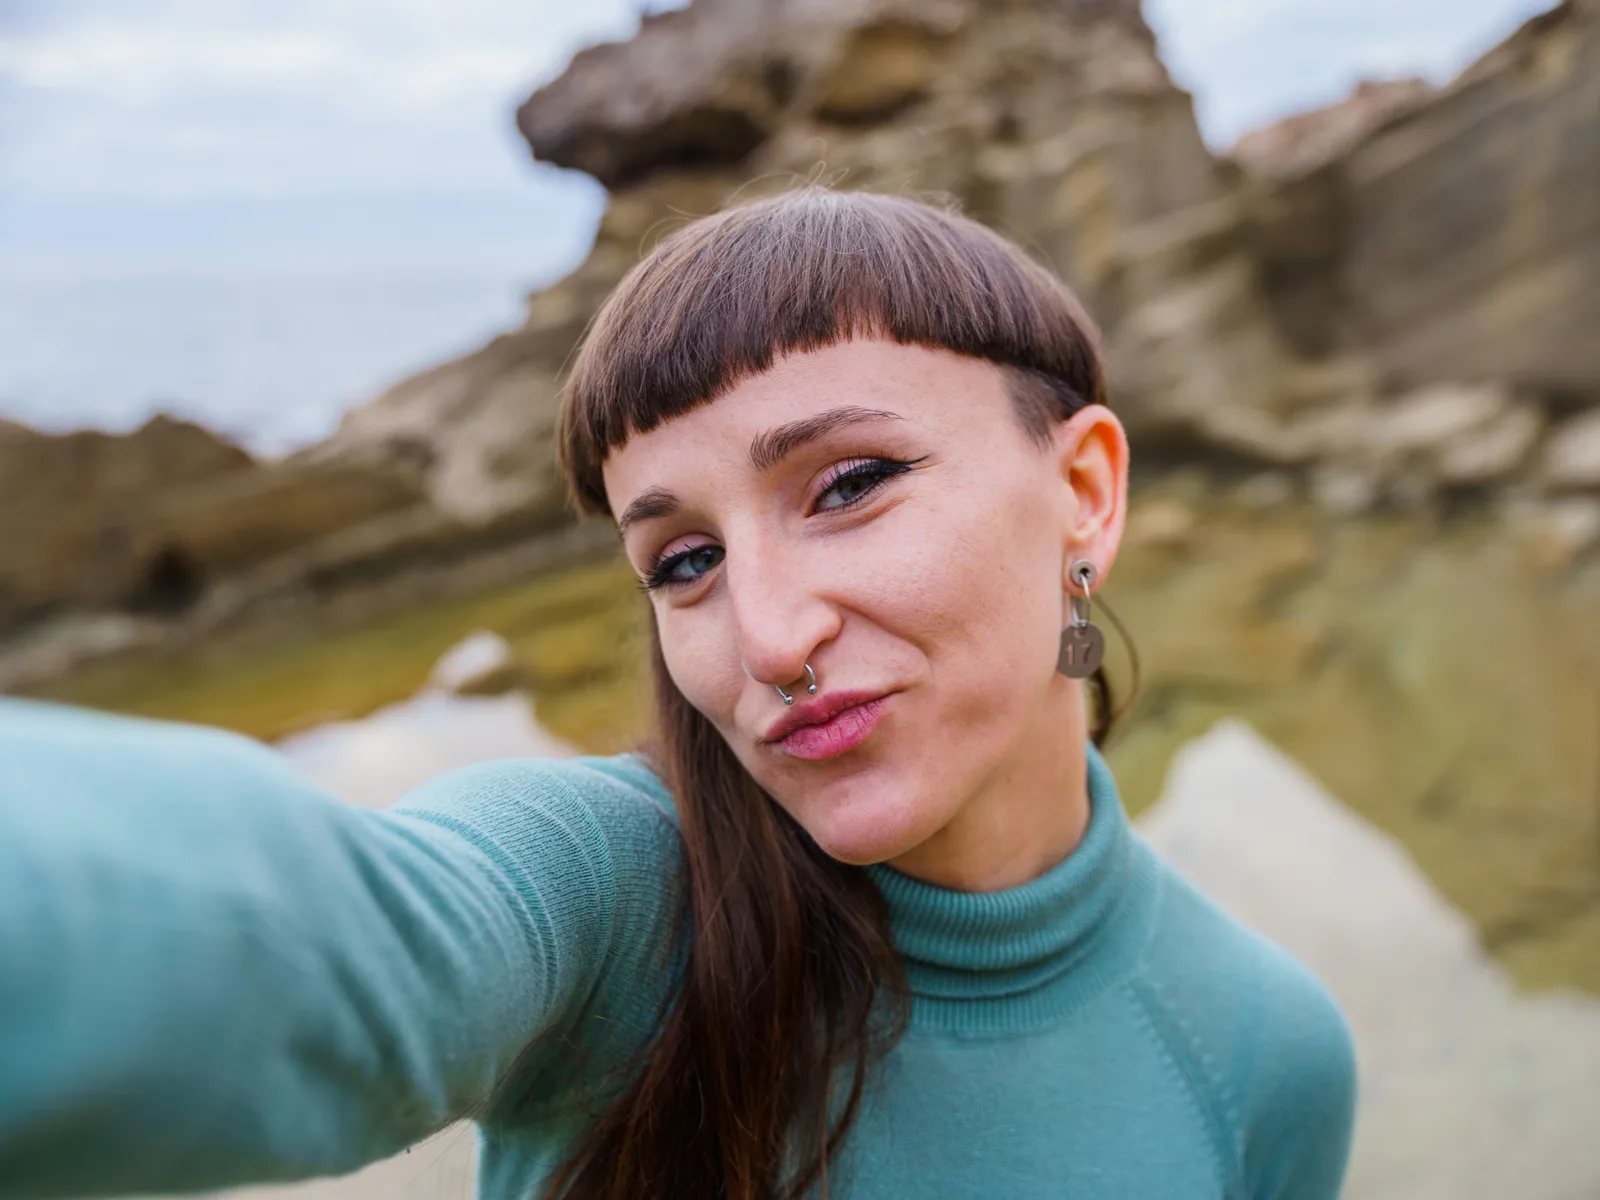 Woman with a Disconnected Mushroom Cut Mullet Type taking a selfie on a hike in a rocky area